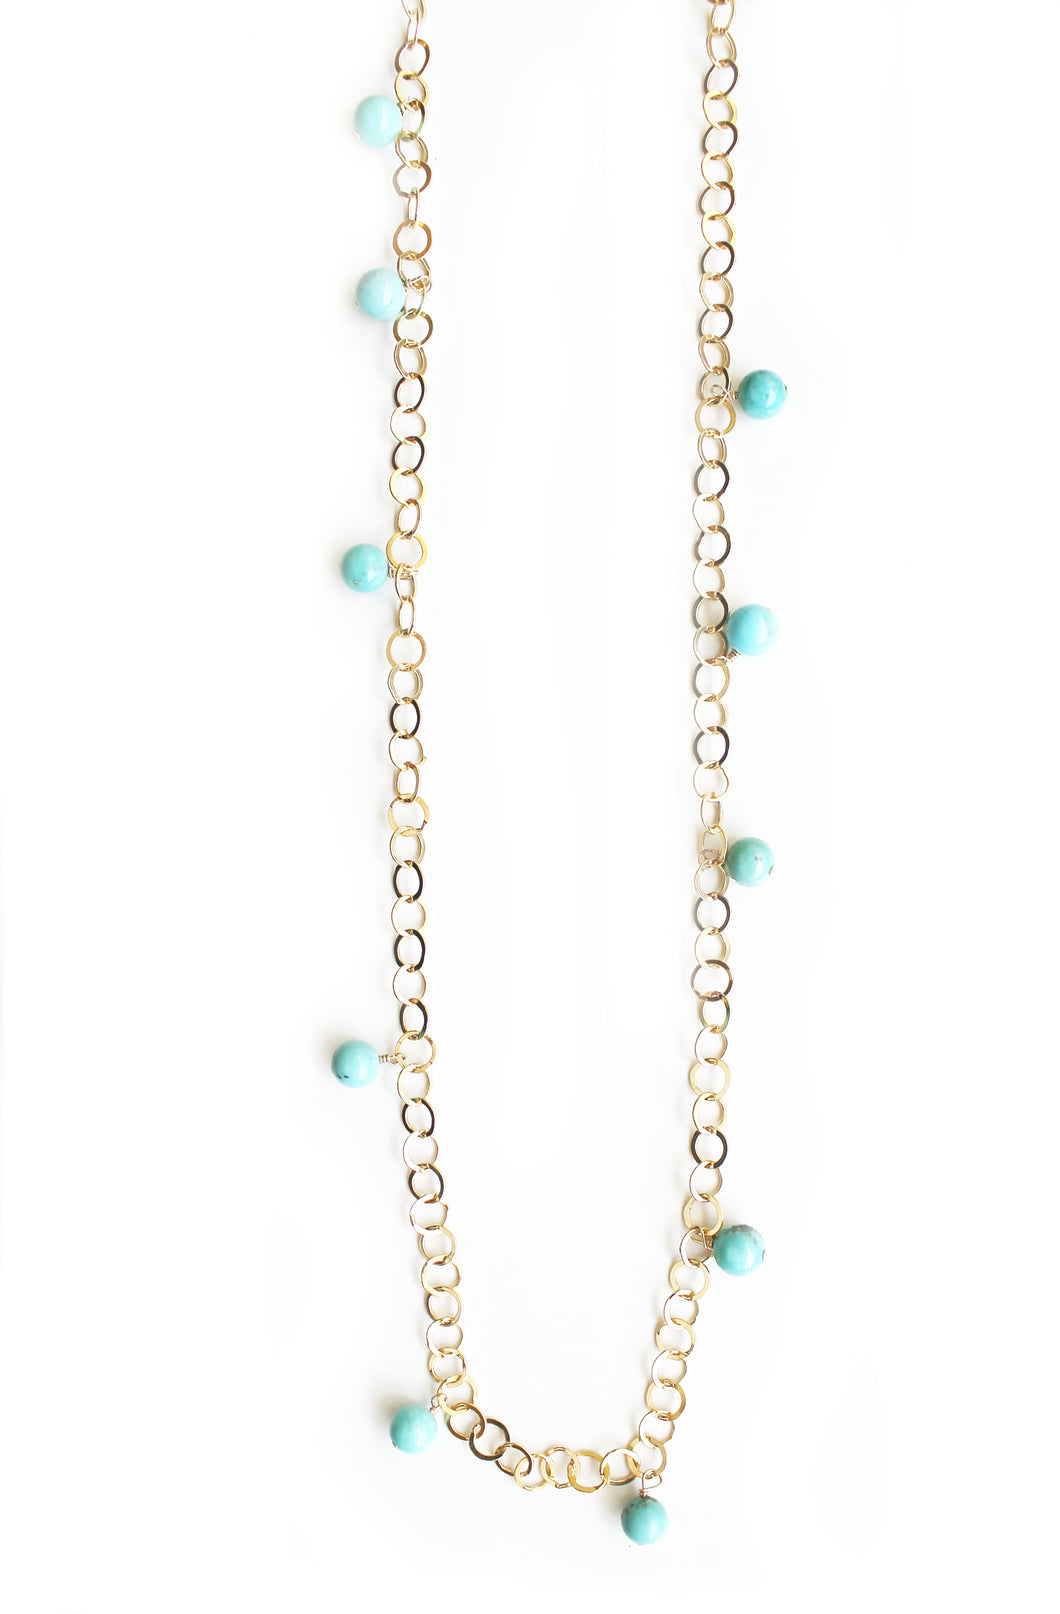 Beyond Southern Gates® Gold Filled Handwrought Necklace with Turquoise Beads